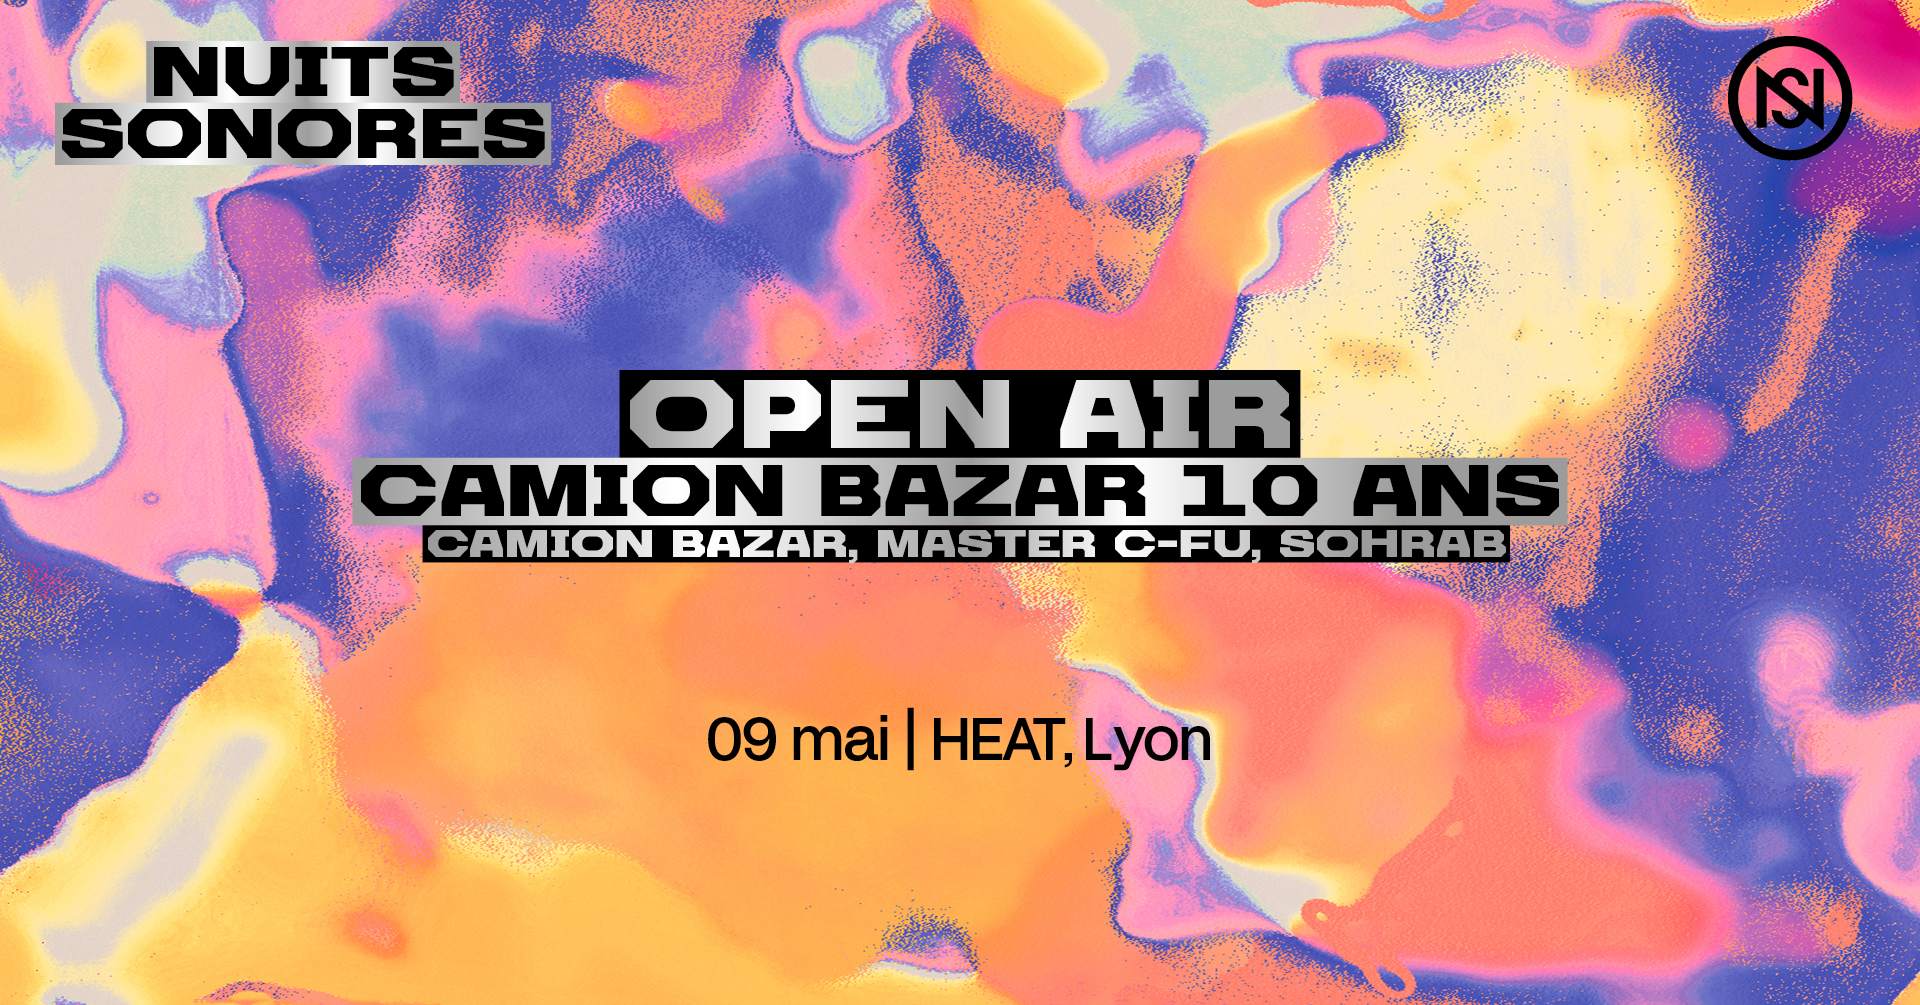 Nuits Sonores open air: Camion Bazar 10 ans - フライヤー表